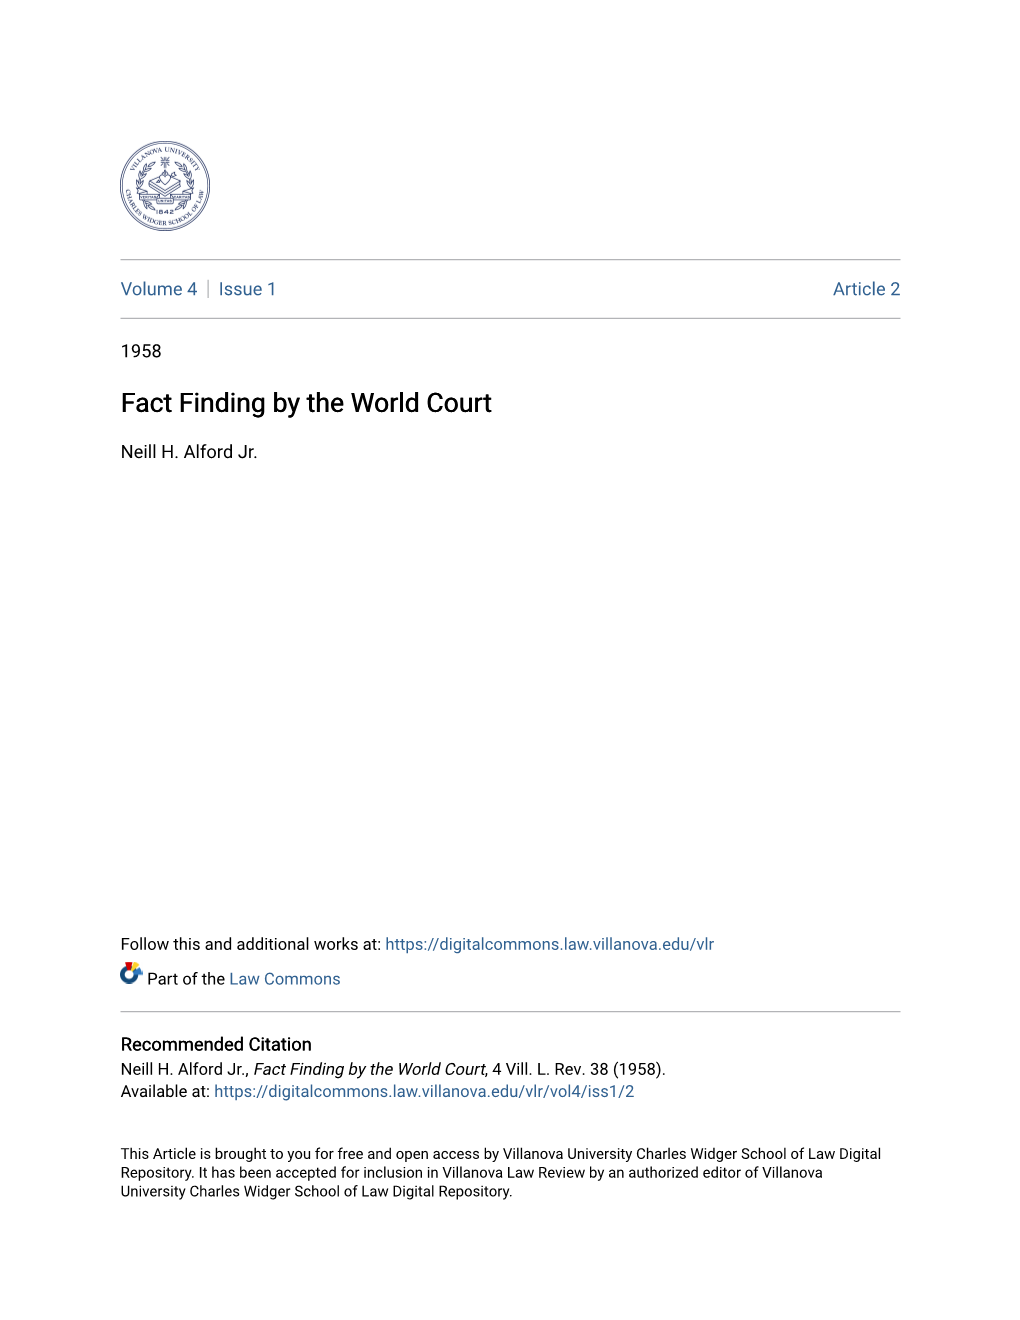 Fact Finding by the World Court